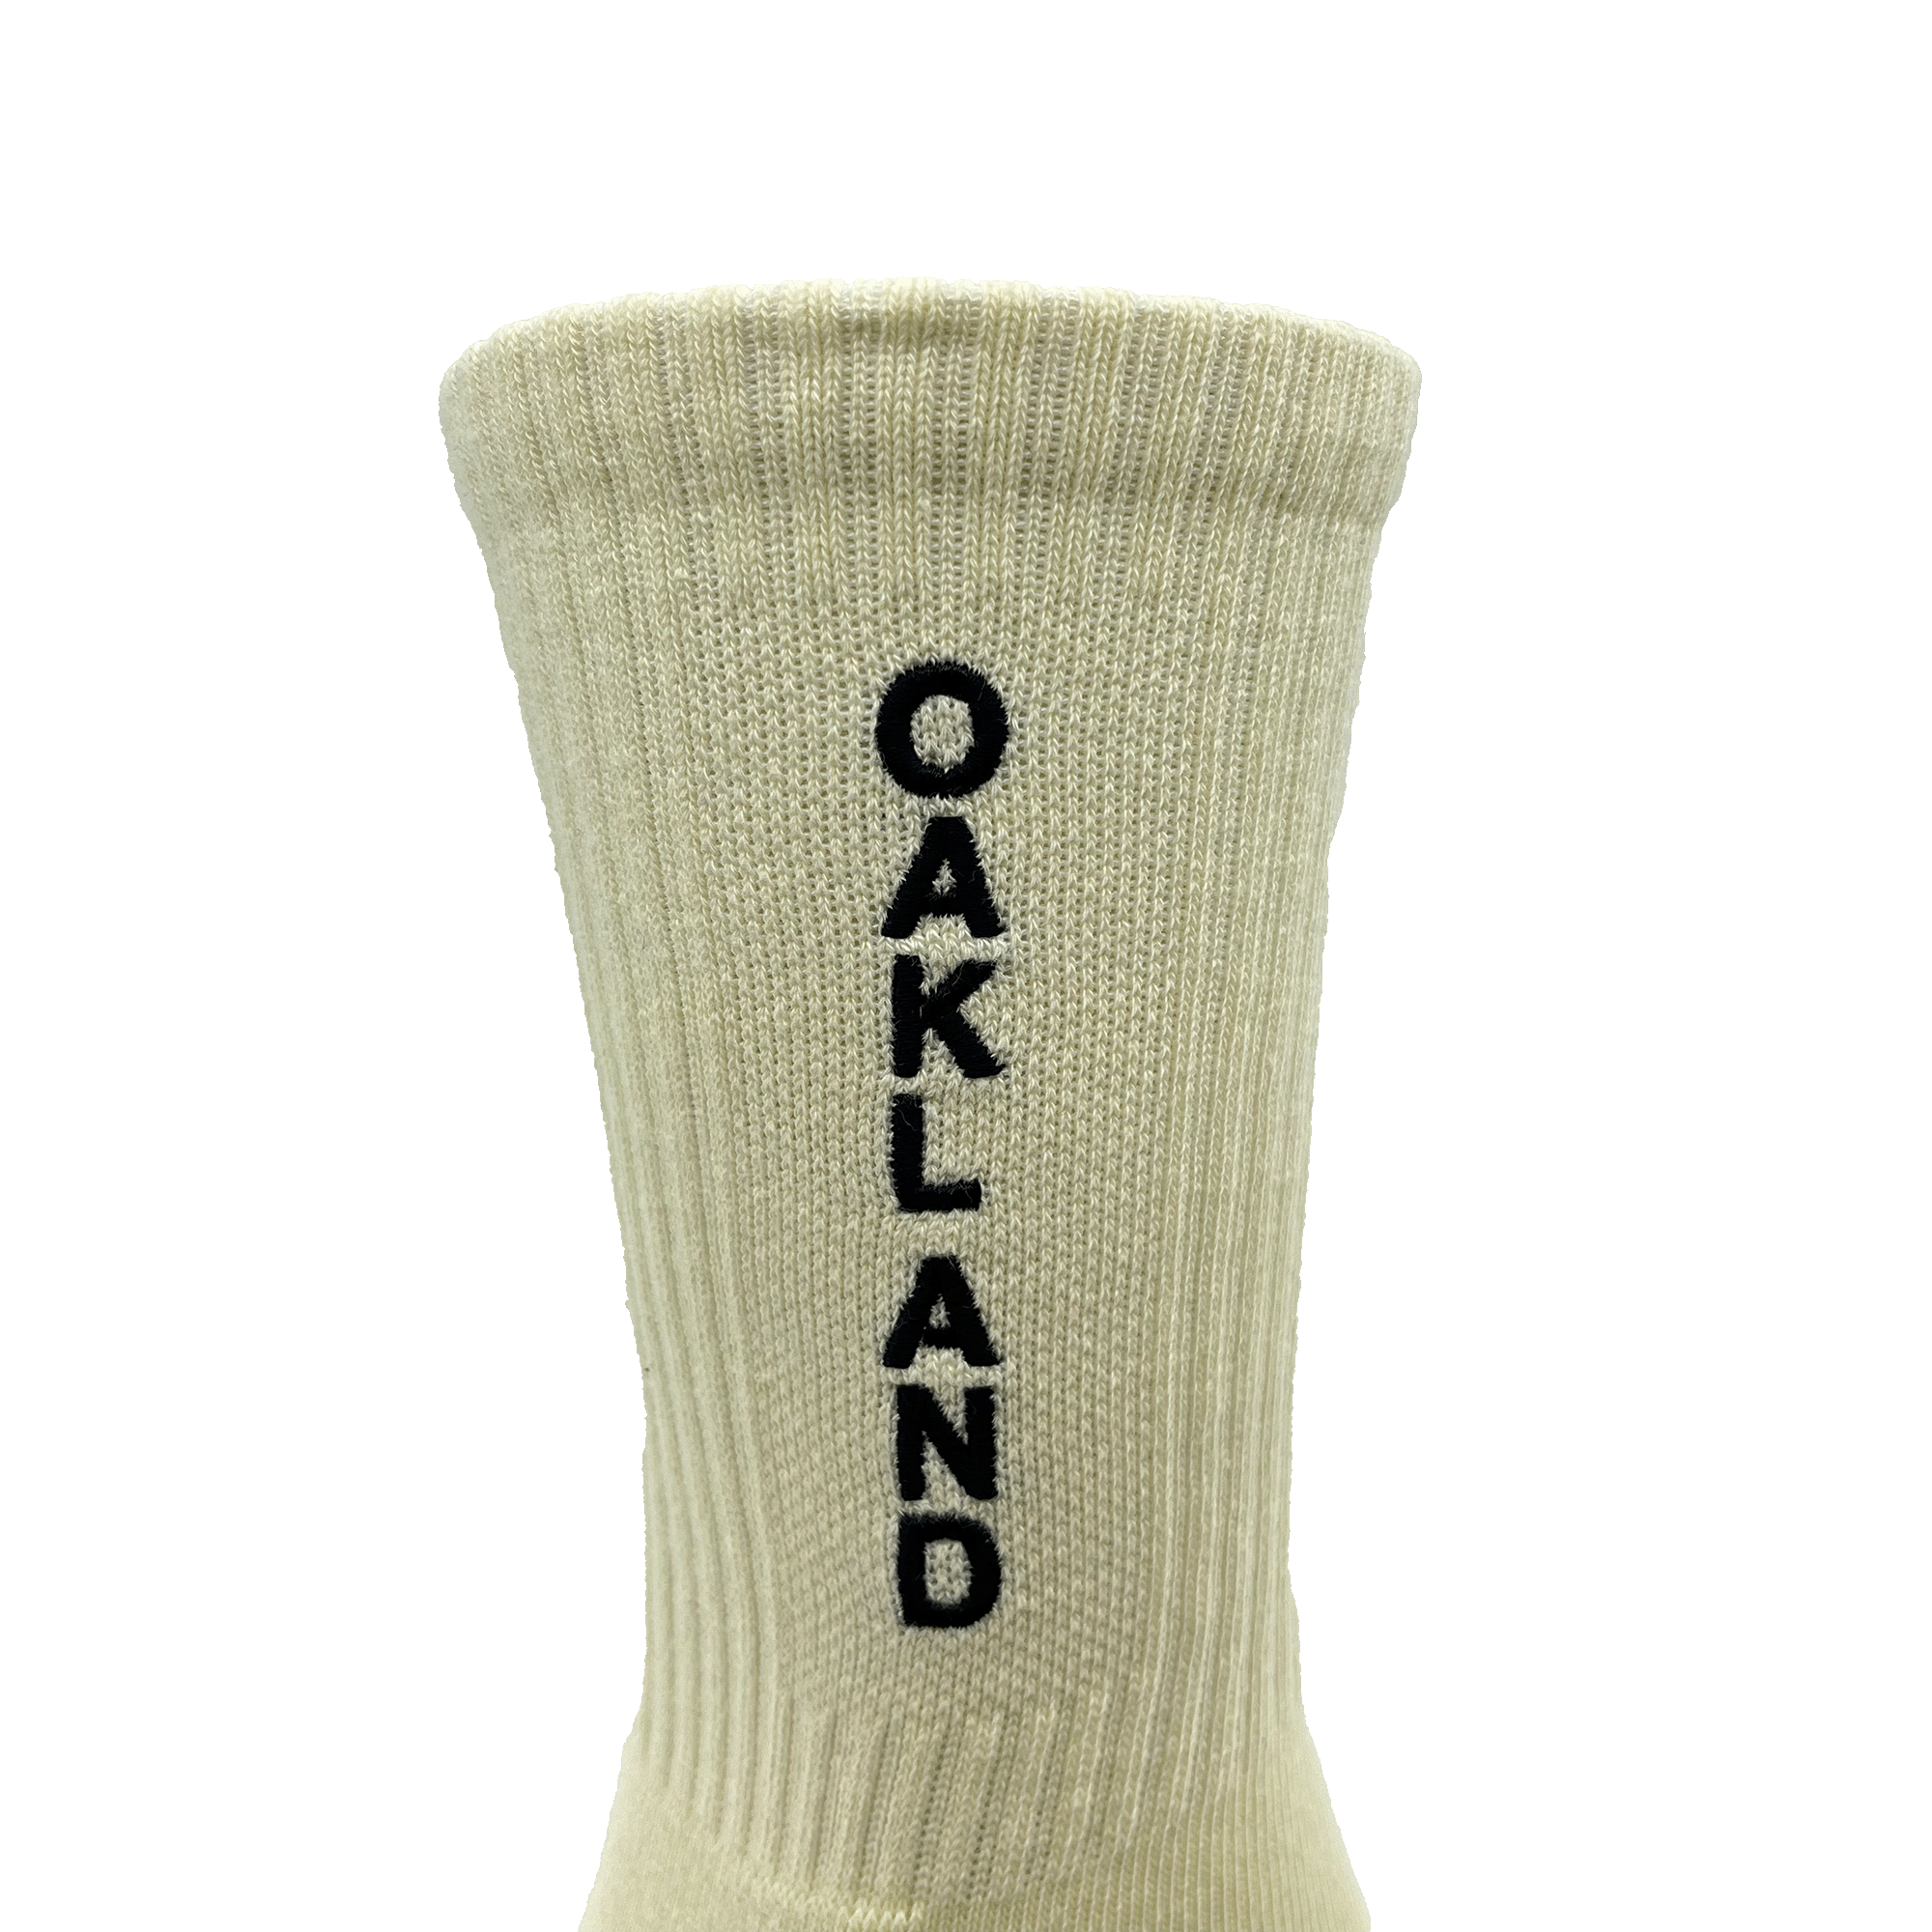 Close-up of embroidered black OAKLAND wordmark on the side of white crew sock.